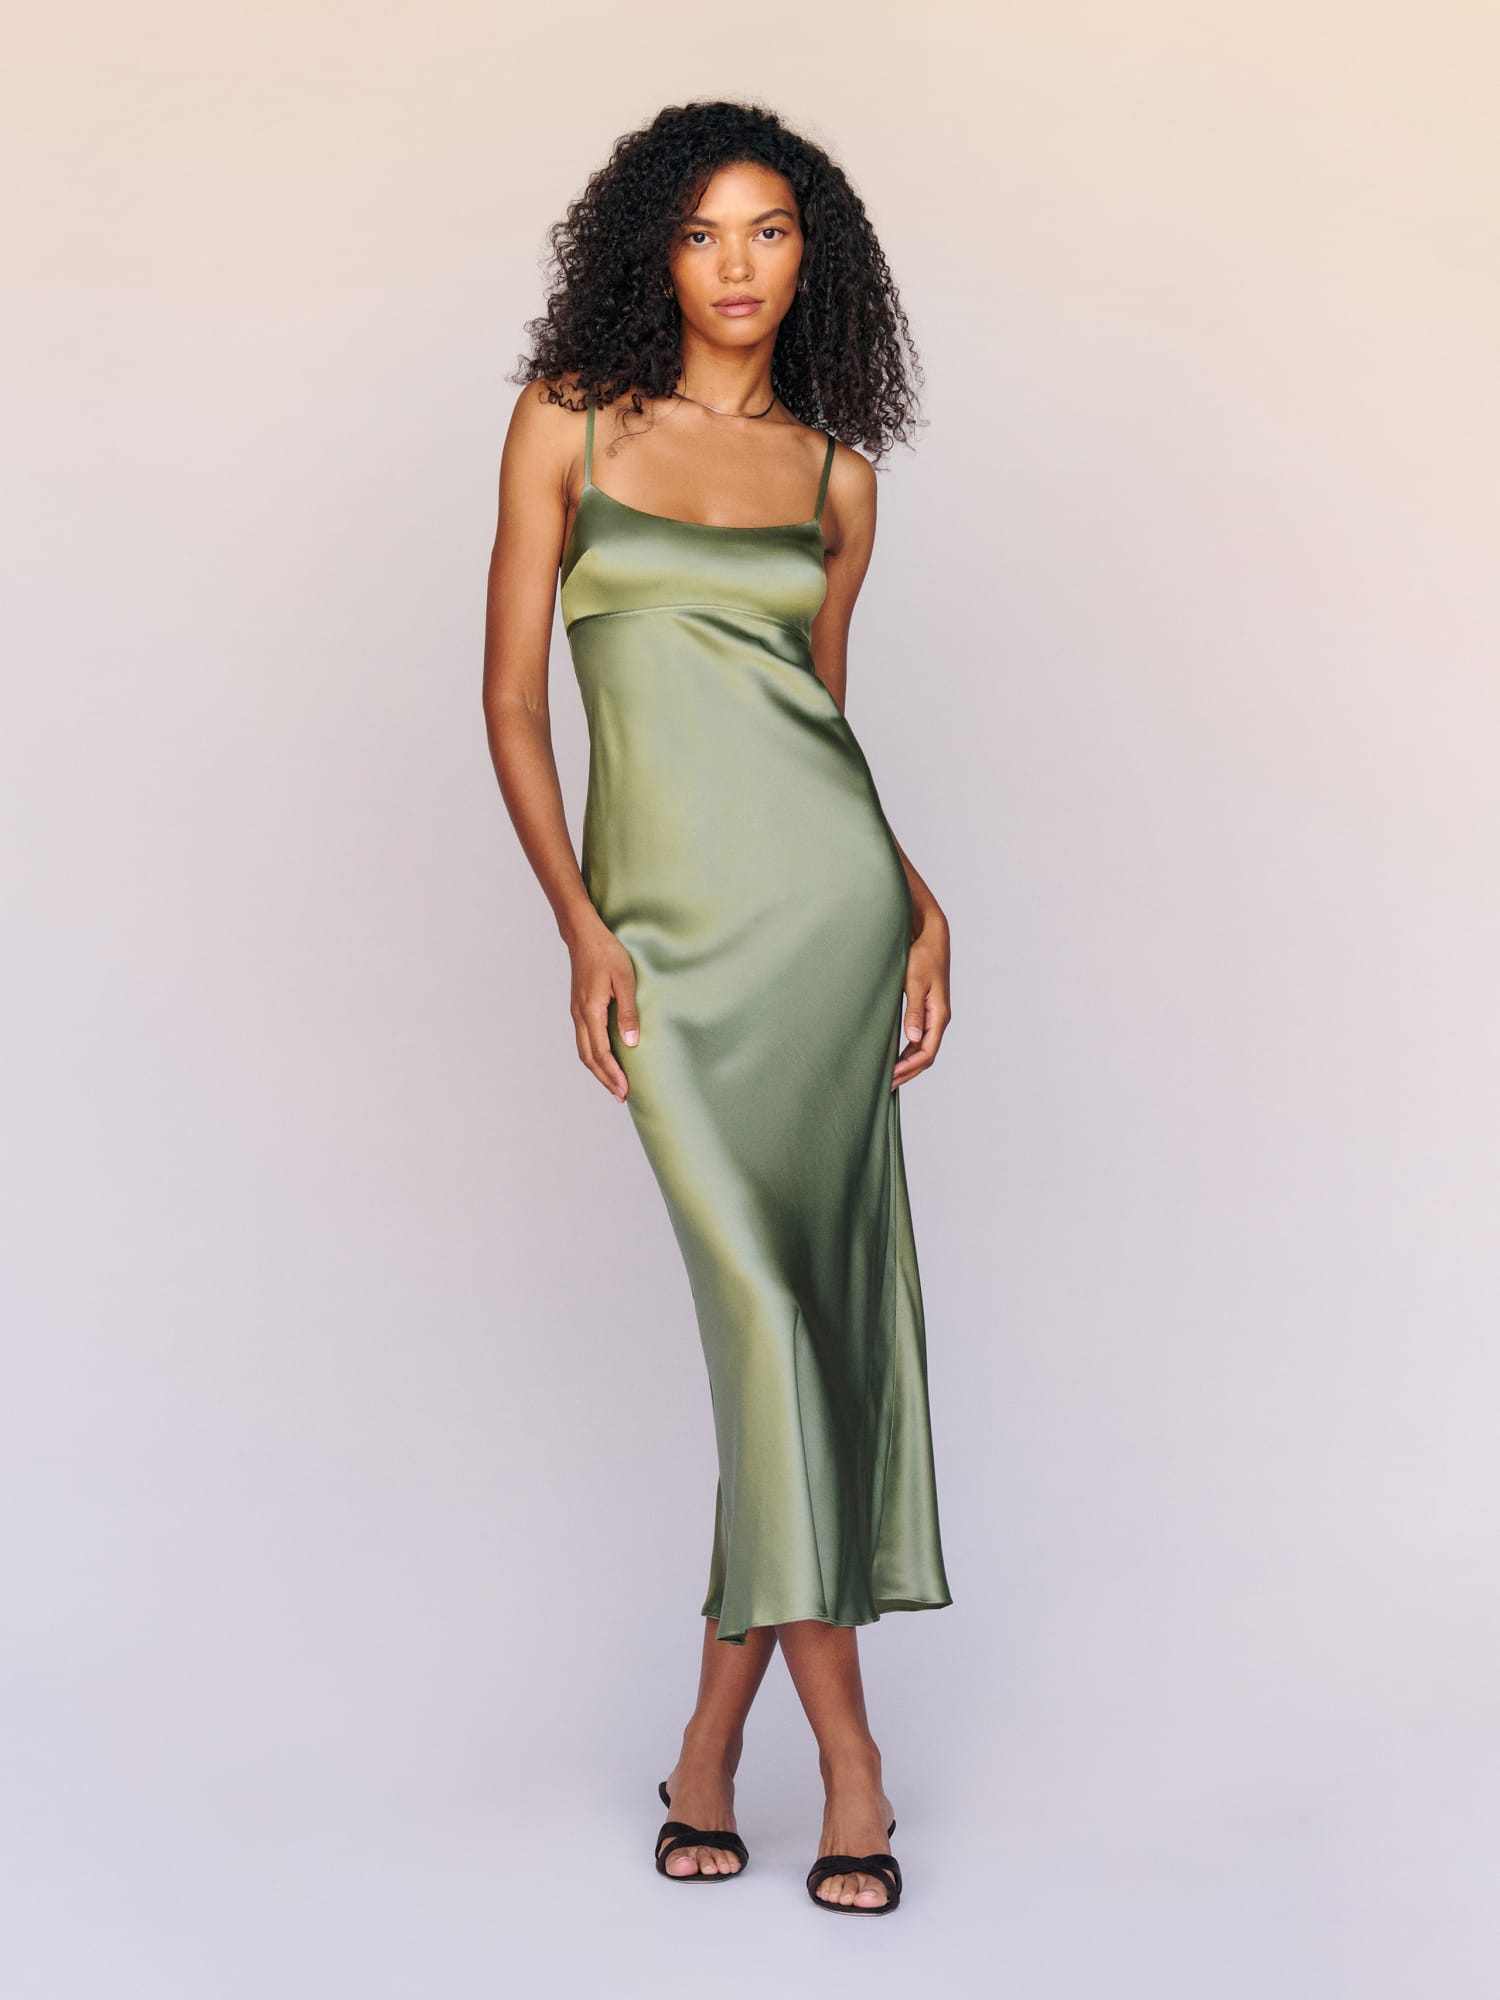 Reformation Has a Fashion Line of Dresses and Tops For Women With